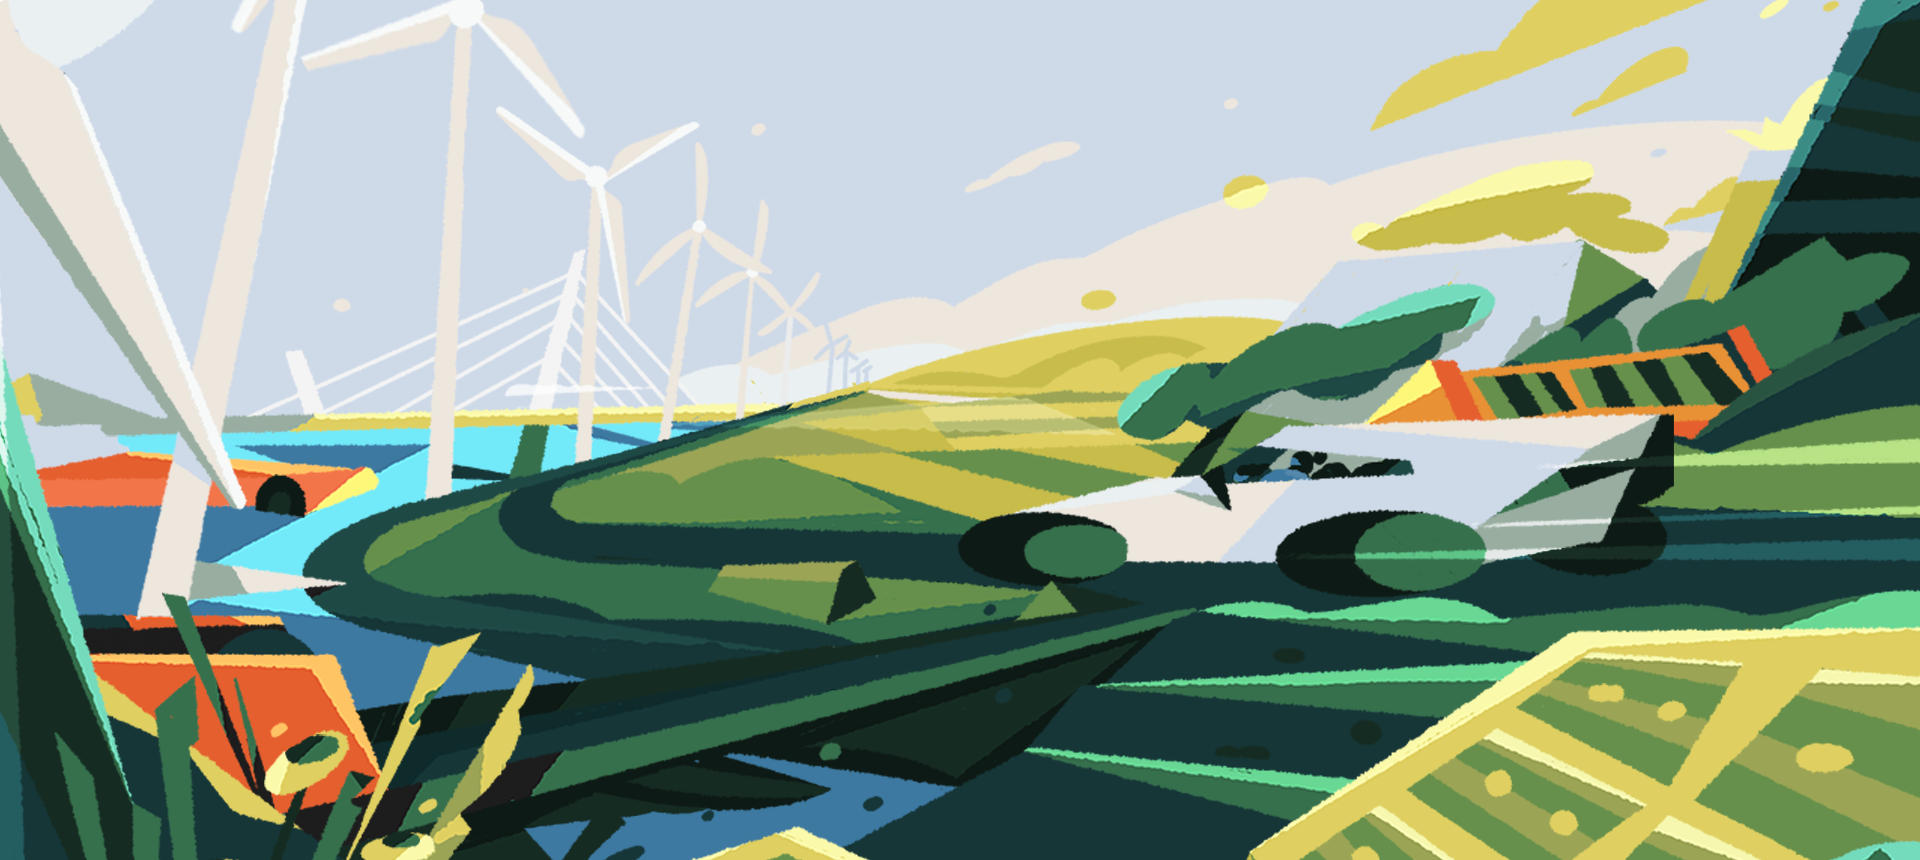 artistic representation of wind turbines in the country